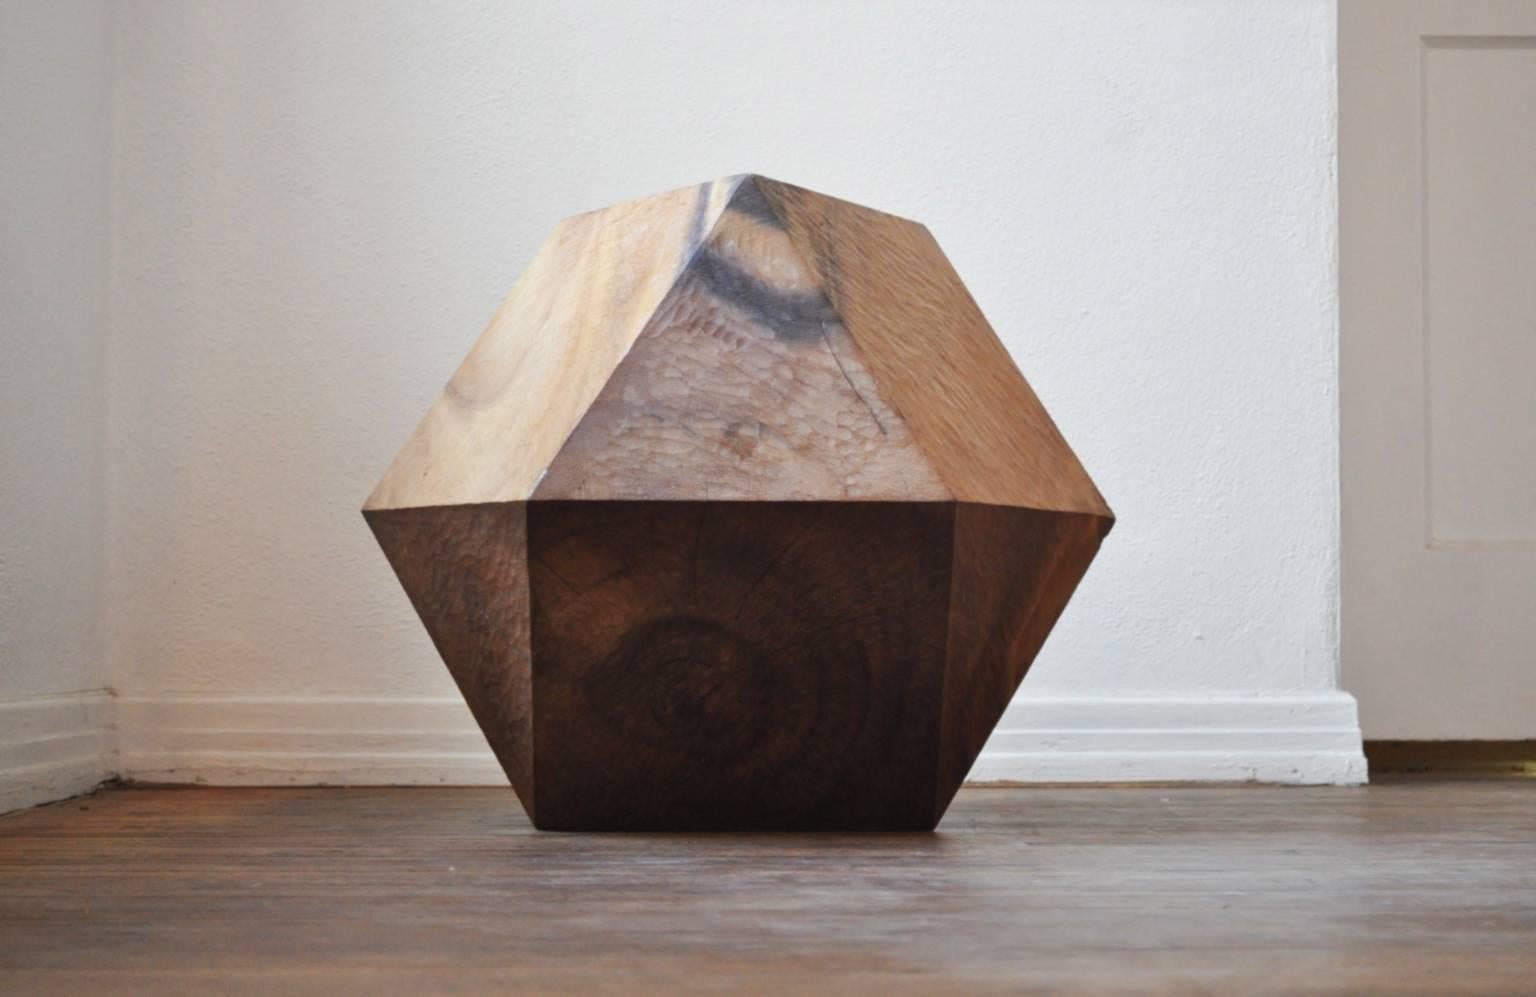 The sculptural works of Aleph Geddis live at the intersection of traditional methods and modernist forms, informed by a lifetime fascination with the foundational structures of our world. This shape is a cuboctahdron or vector equilibrium and is one